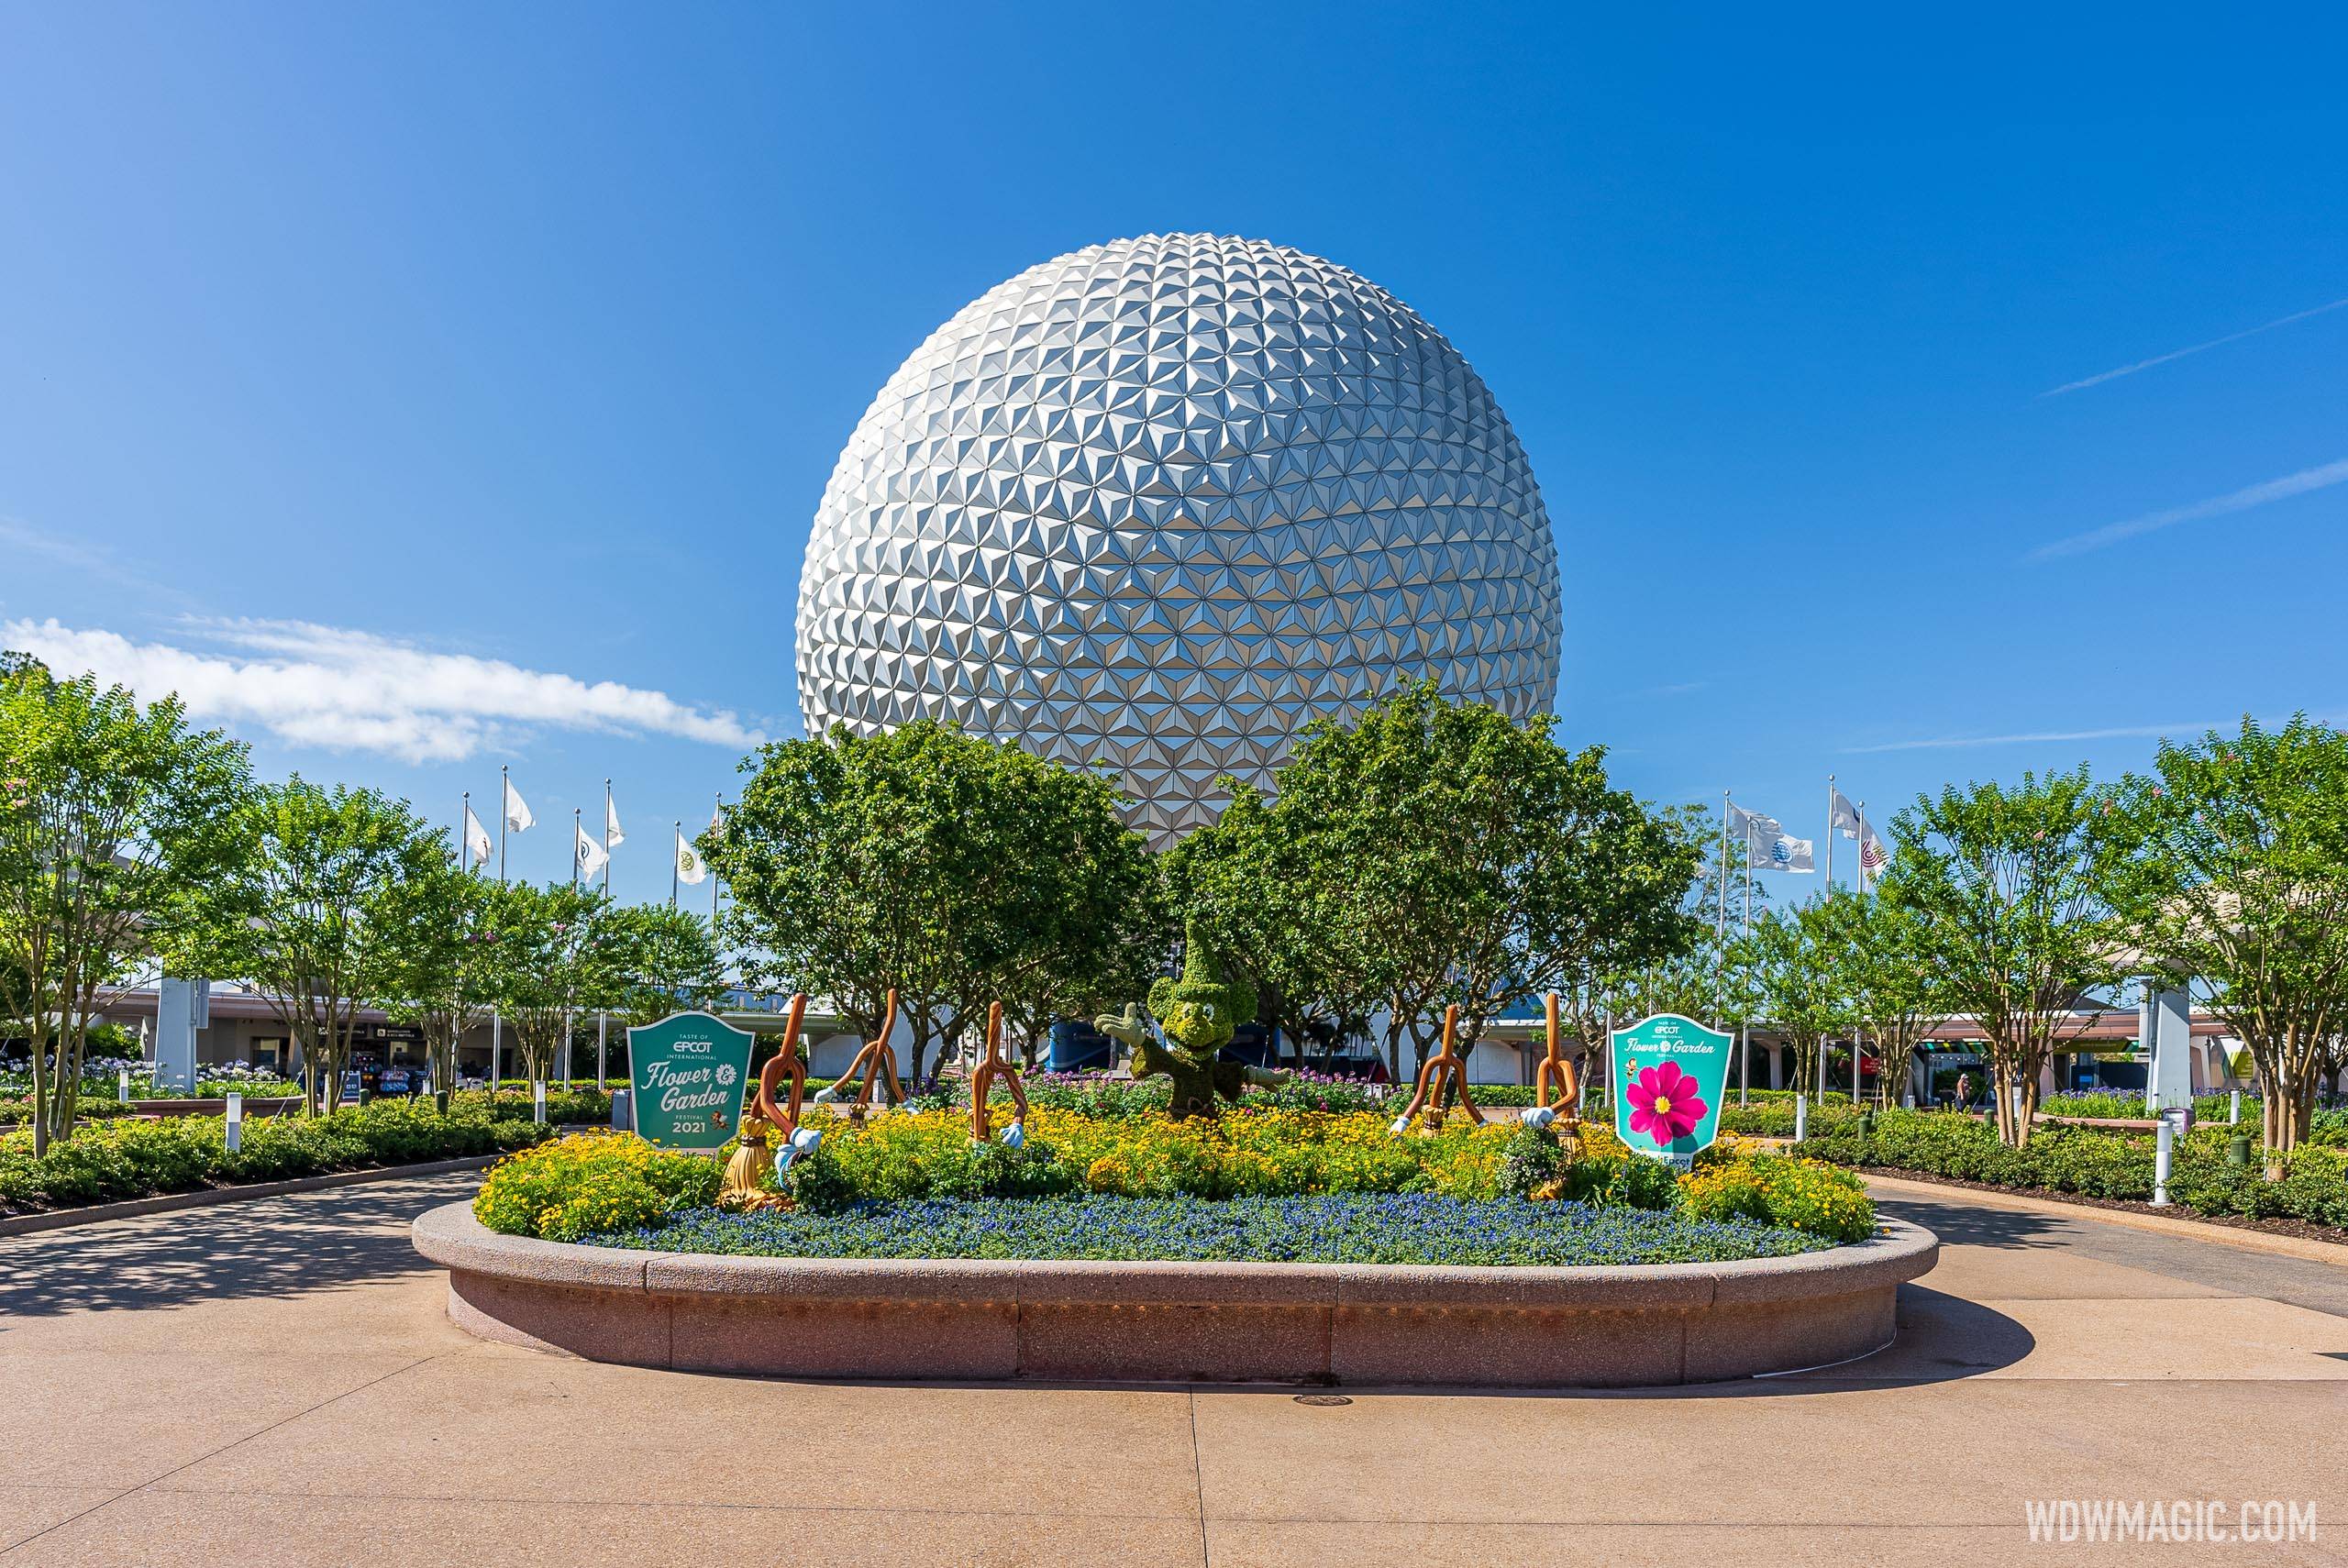 Made with Magic products launch today at Epcot